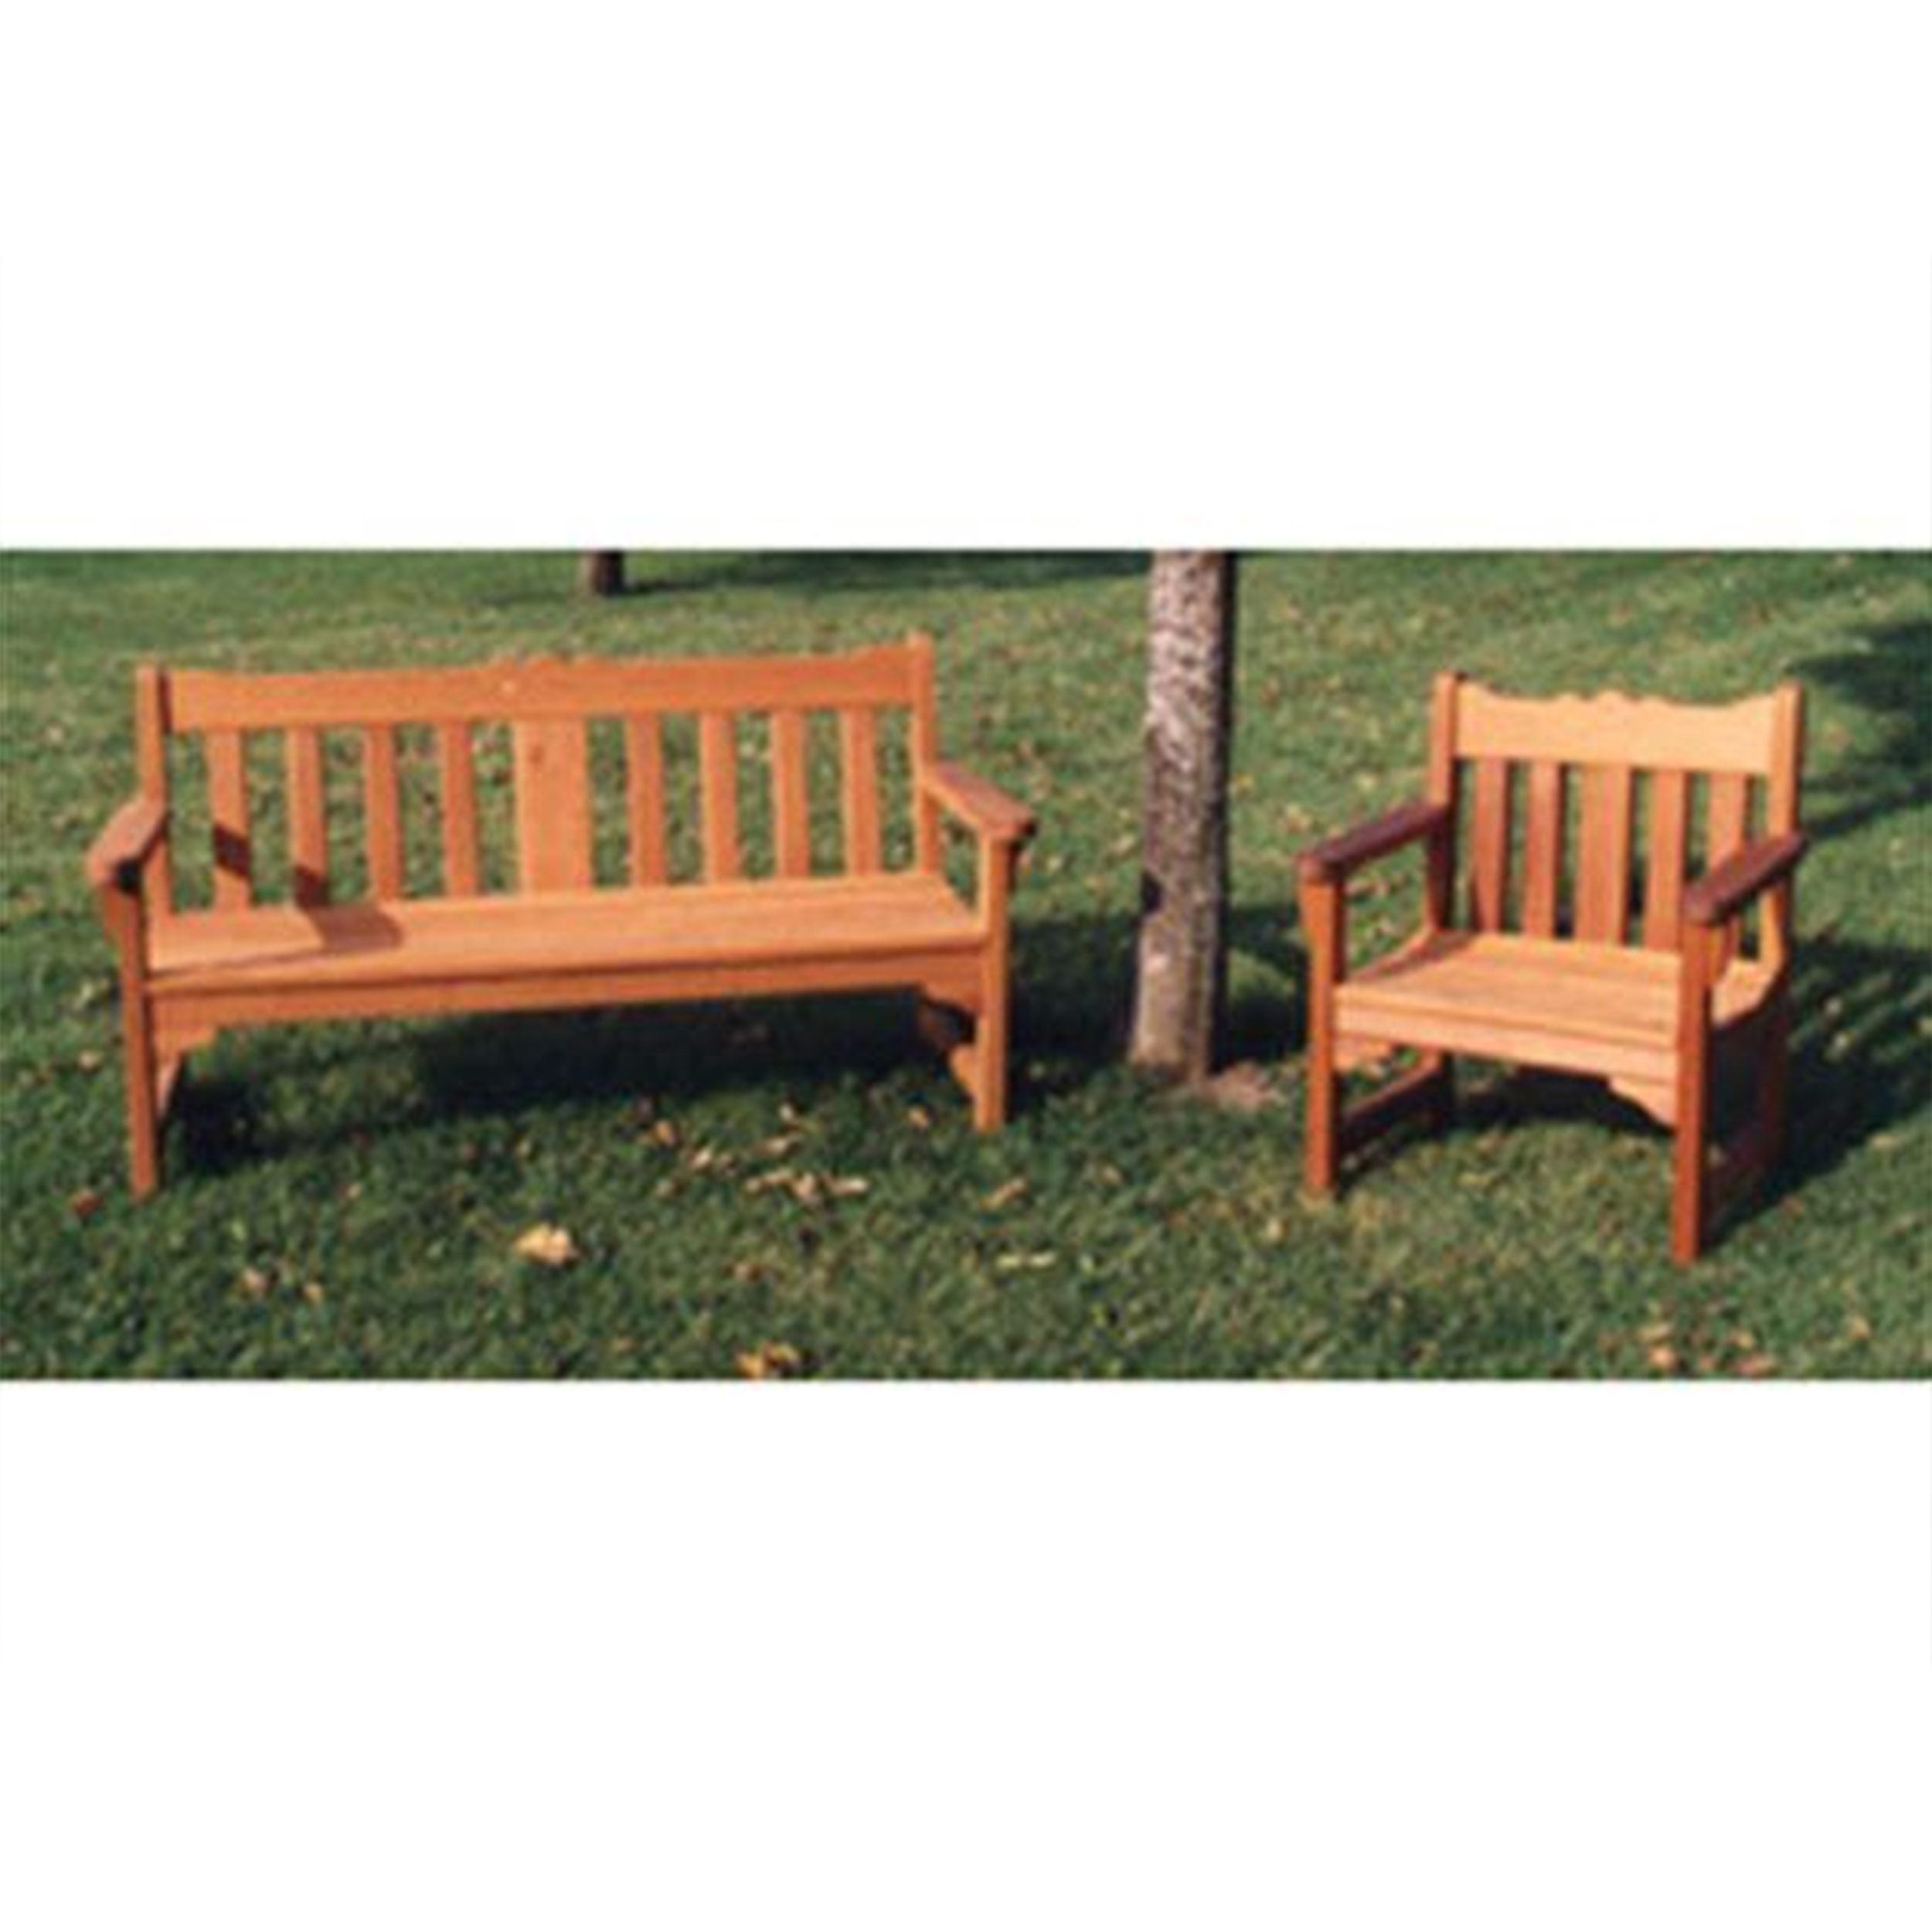 Woodworking Project Paper Plan To Build English Style Garden Bench And Chair